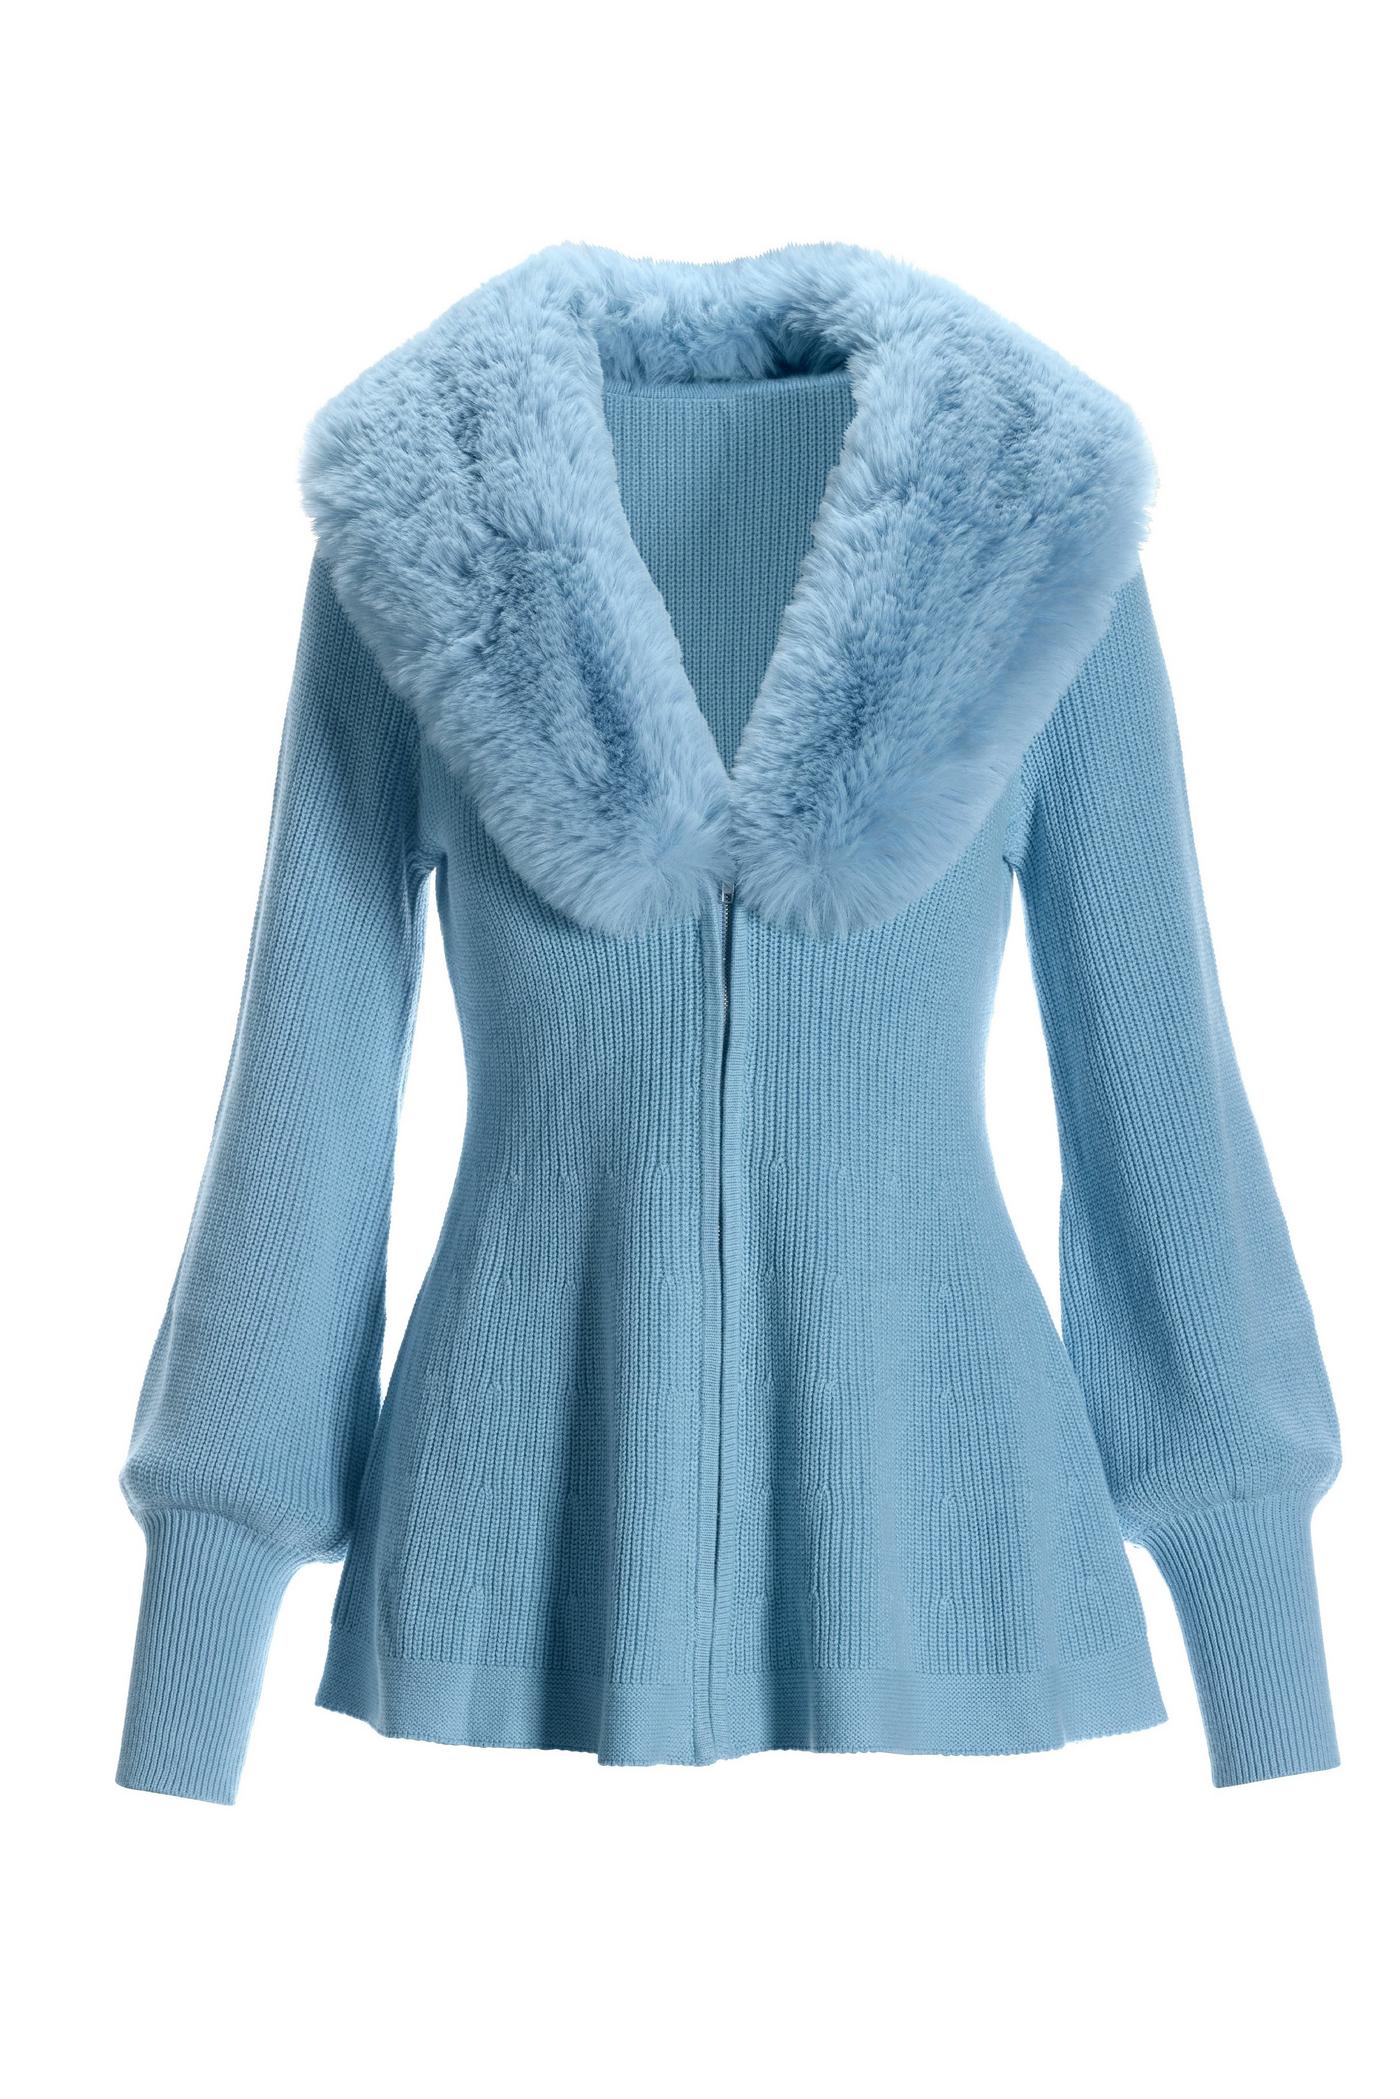 Faux Fur Balloon Sleeve A Line Zip Up Cardigan - Airy Blue 